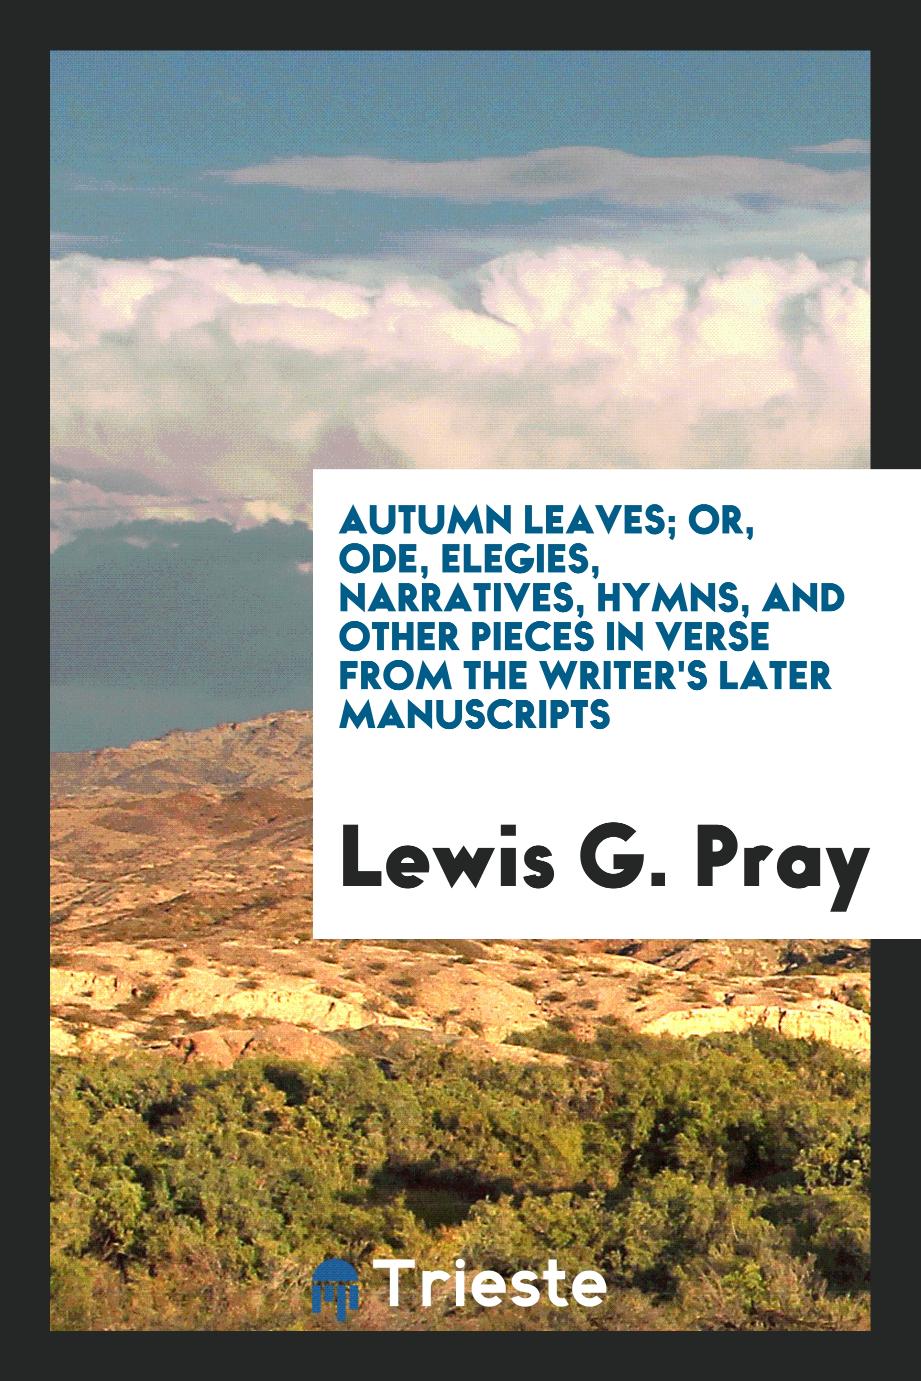 Autumn leaves; or, Ode, elegies, narratives, hymns, and other pieces in verse from the writer's later manuscripts